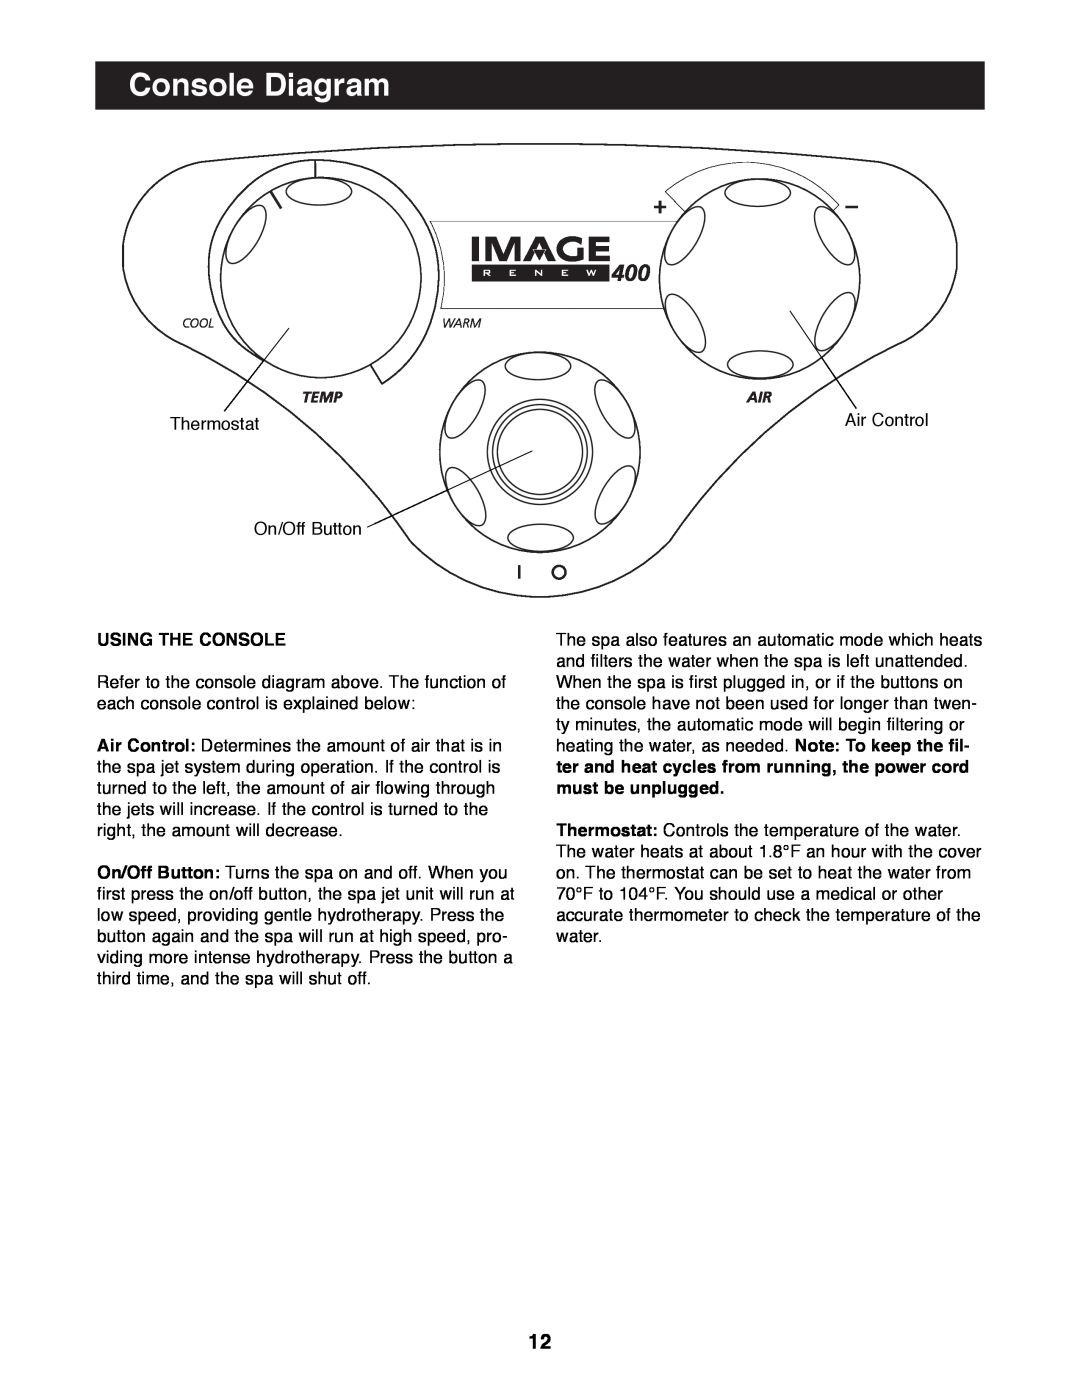 Image IMHS40090 manual Console Diagram, Using The Console 